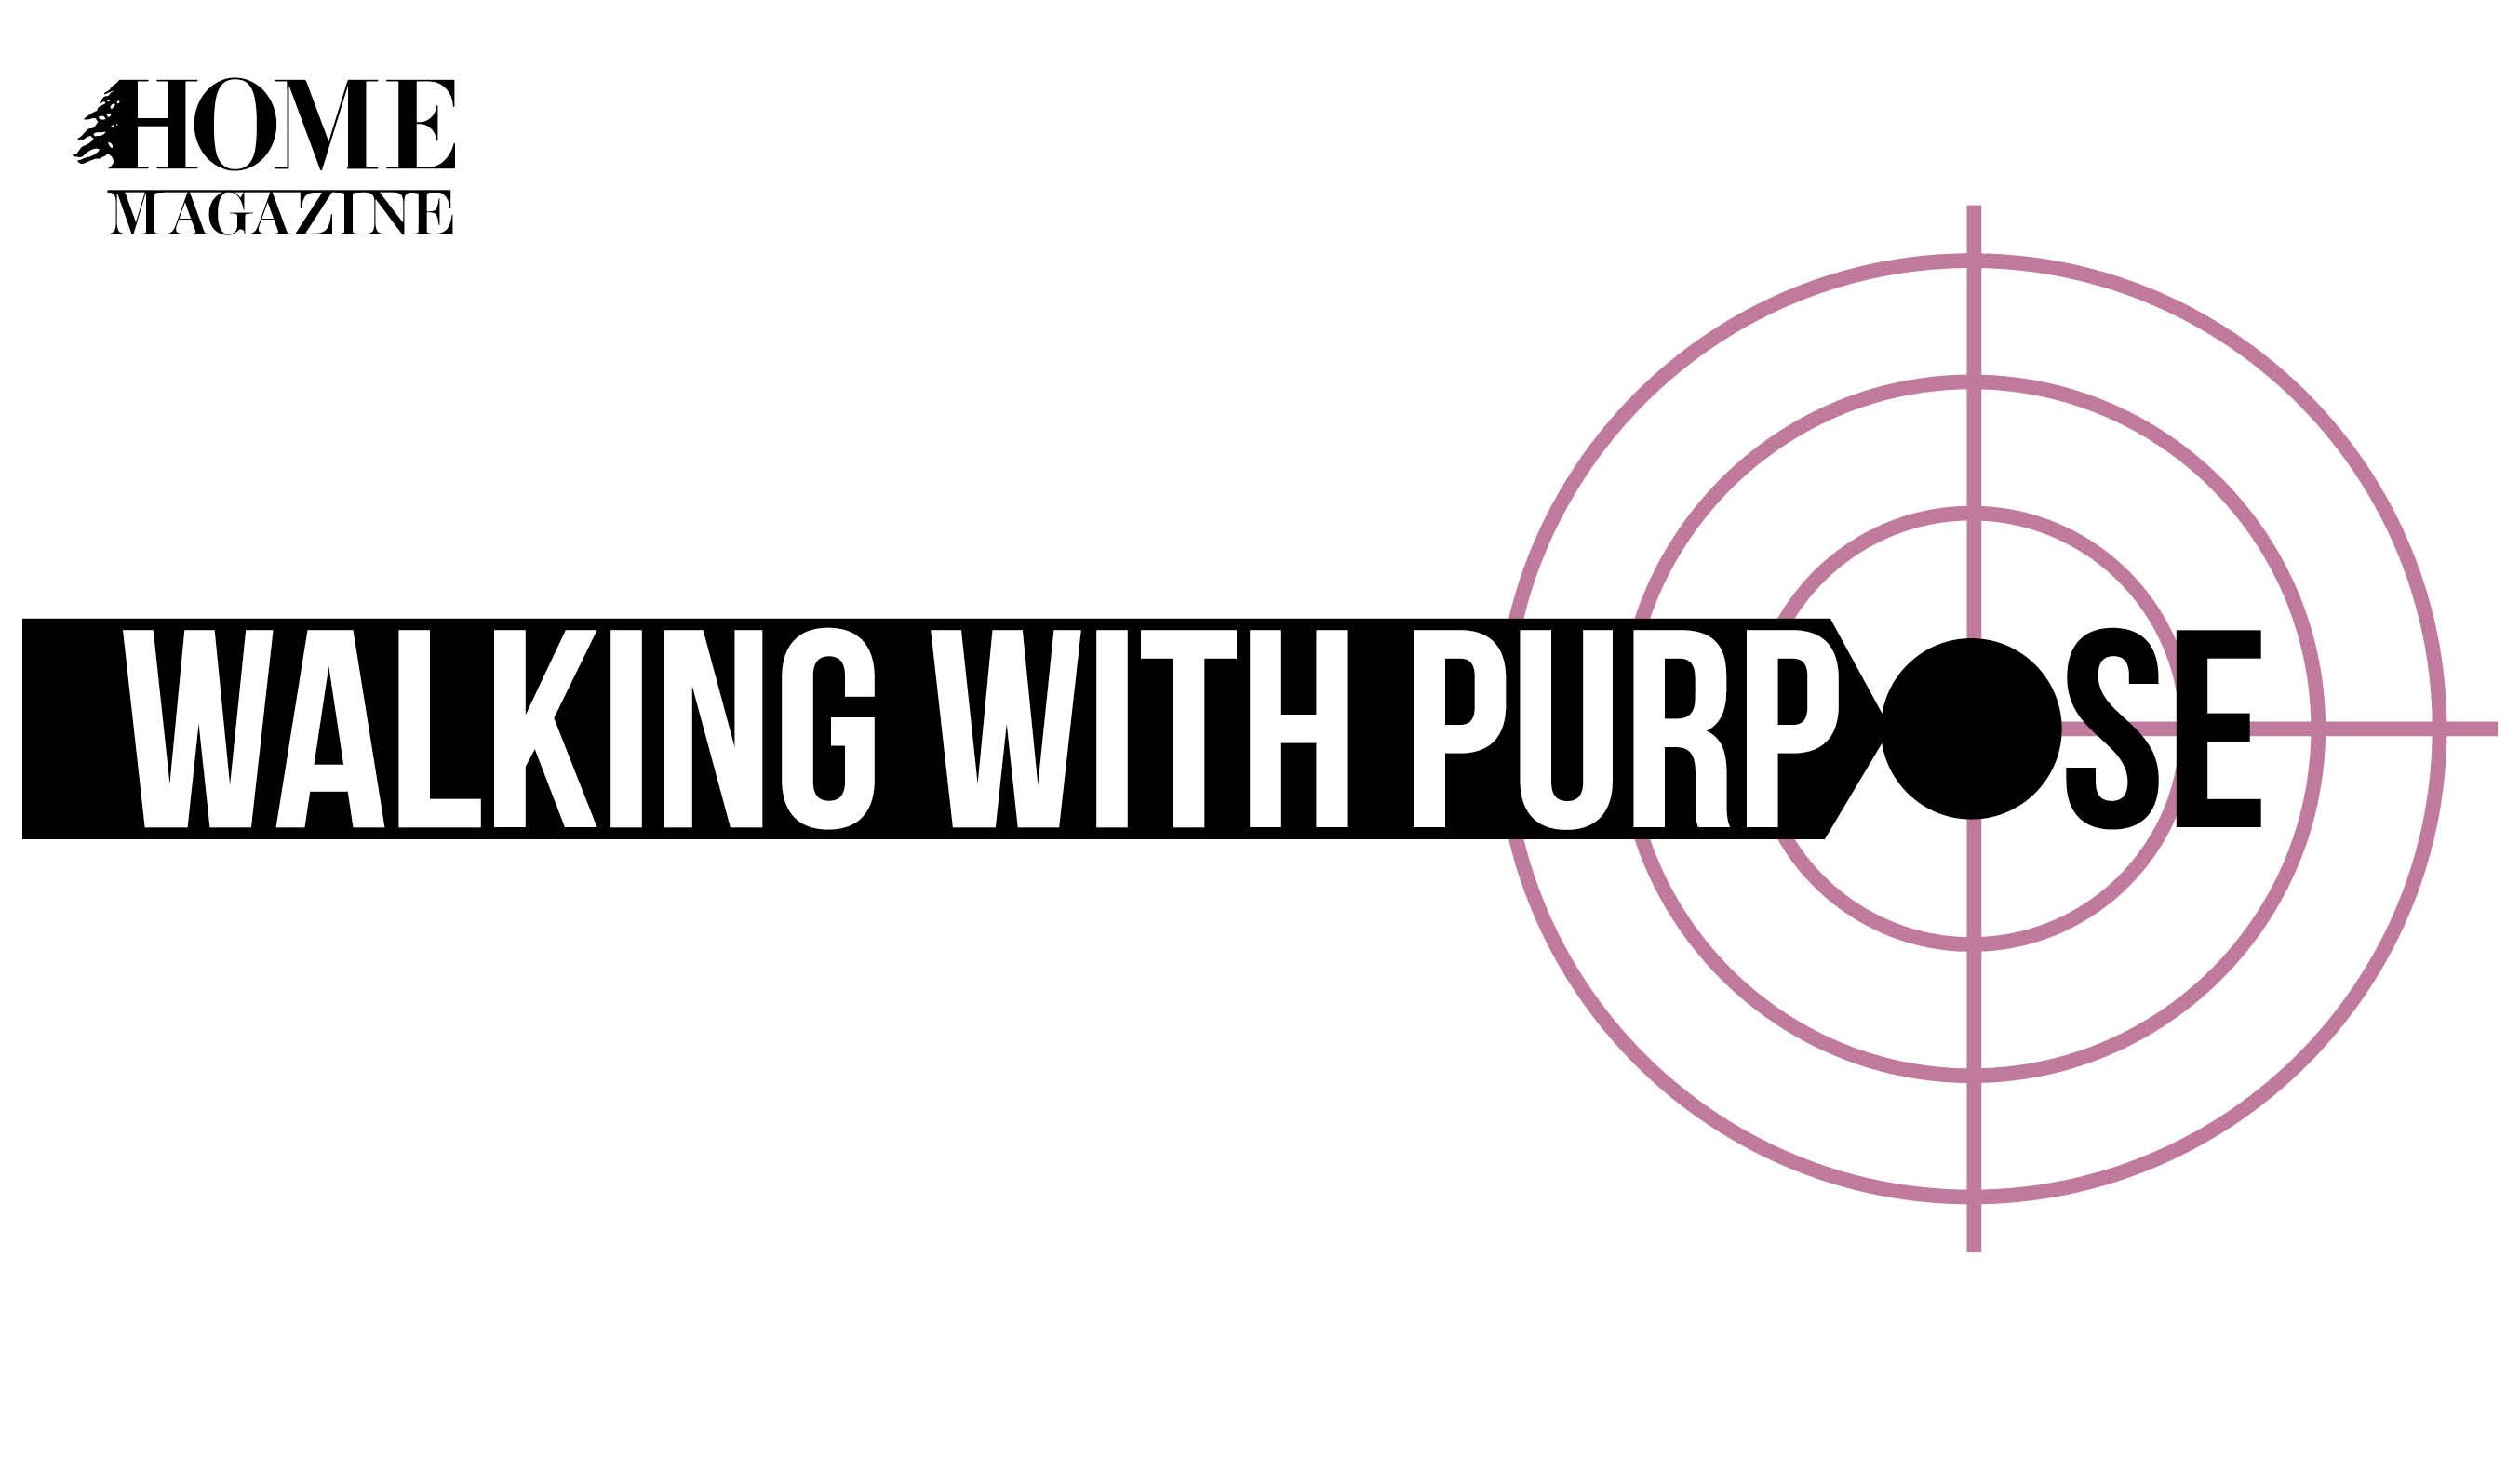 Walking with Purpose writing with design of purple circles